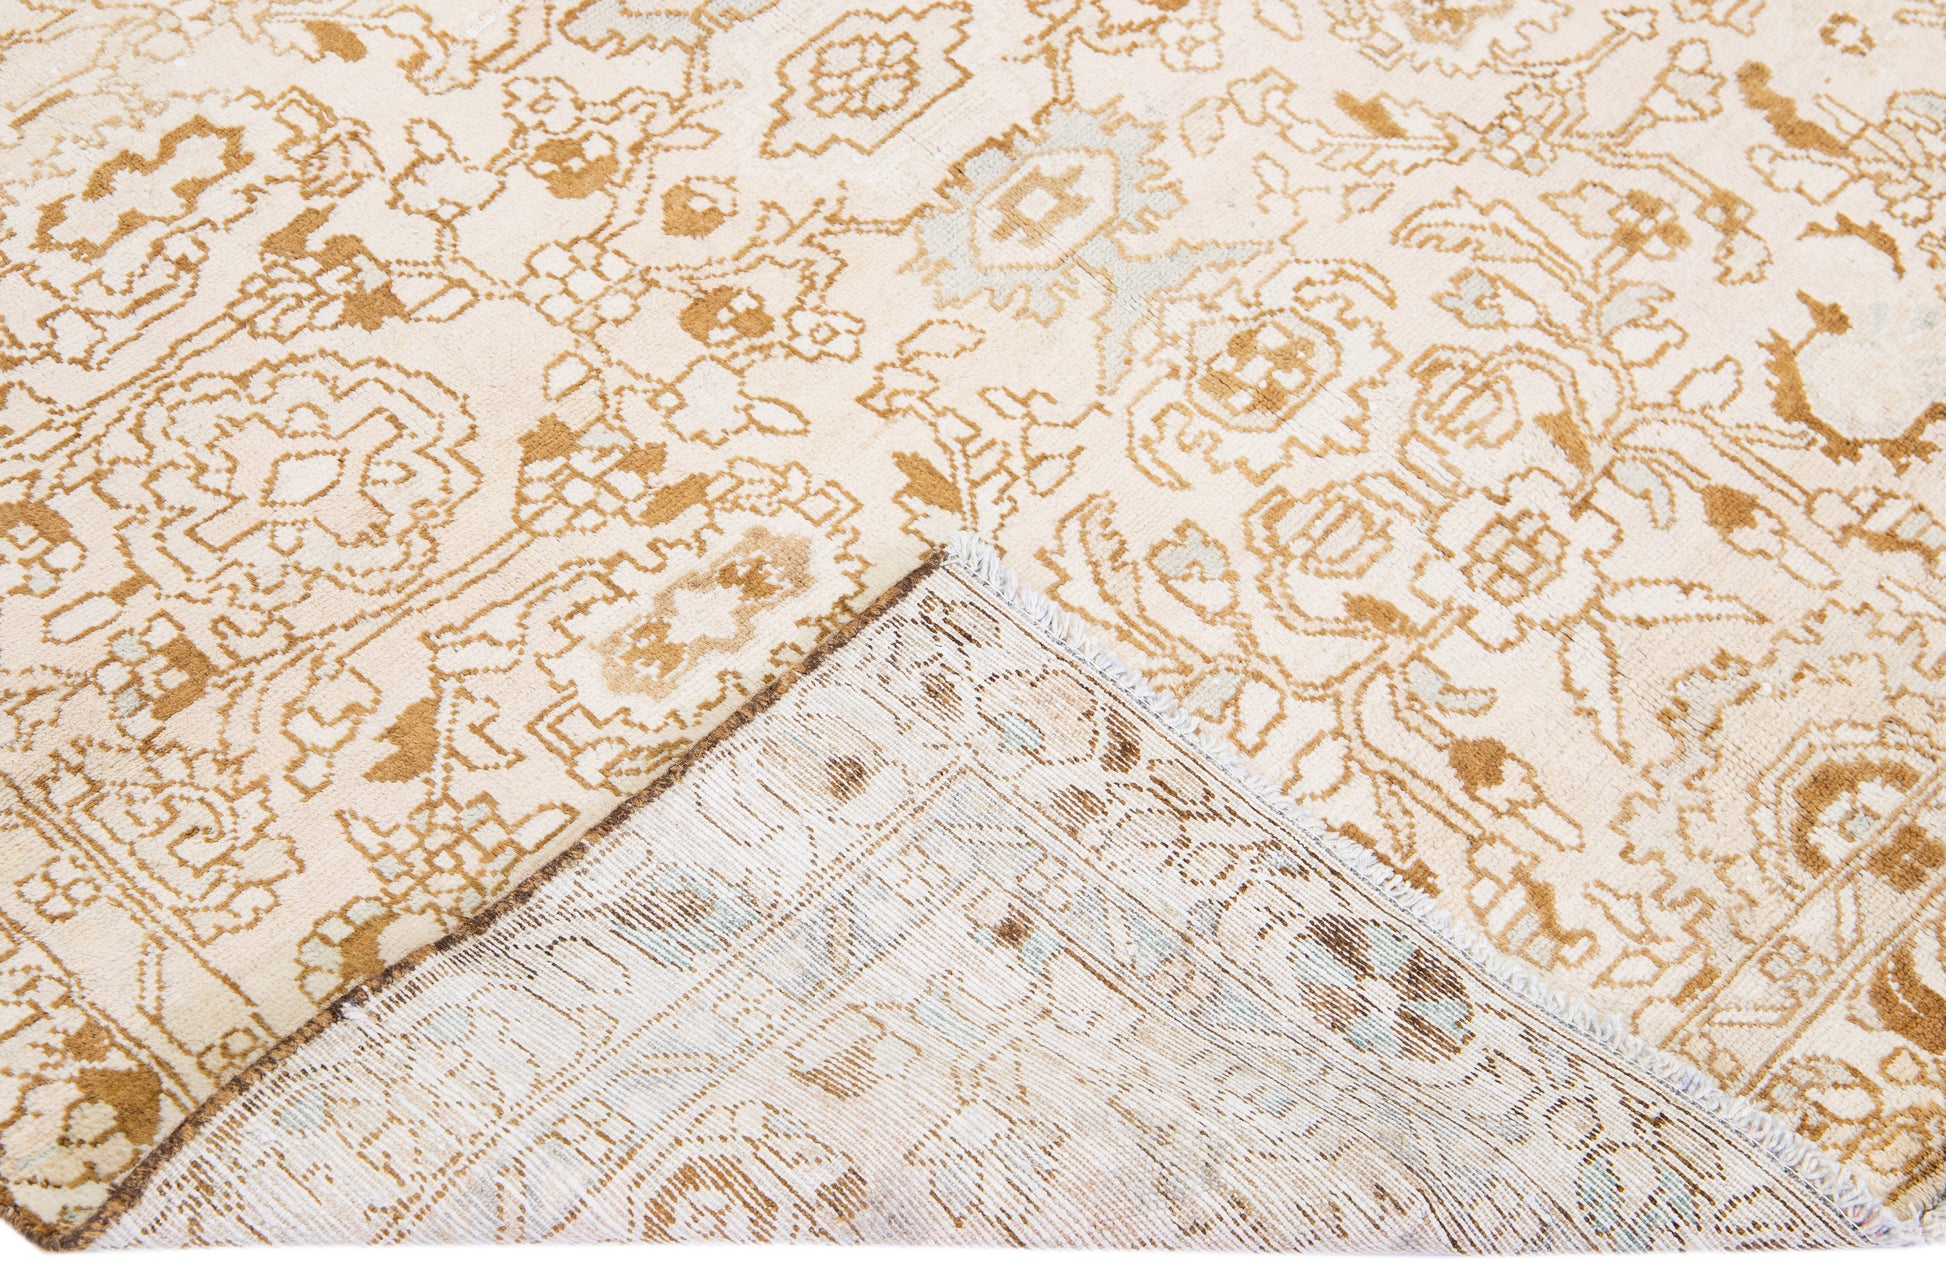 Close up of backside of beige wool rug with floral designs and interwoven patterns